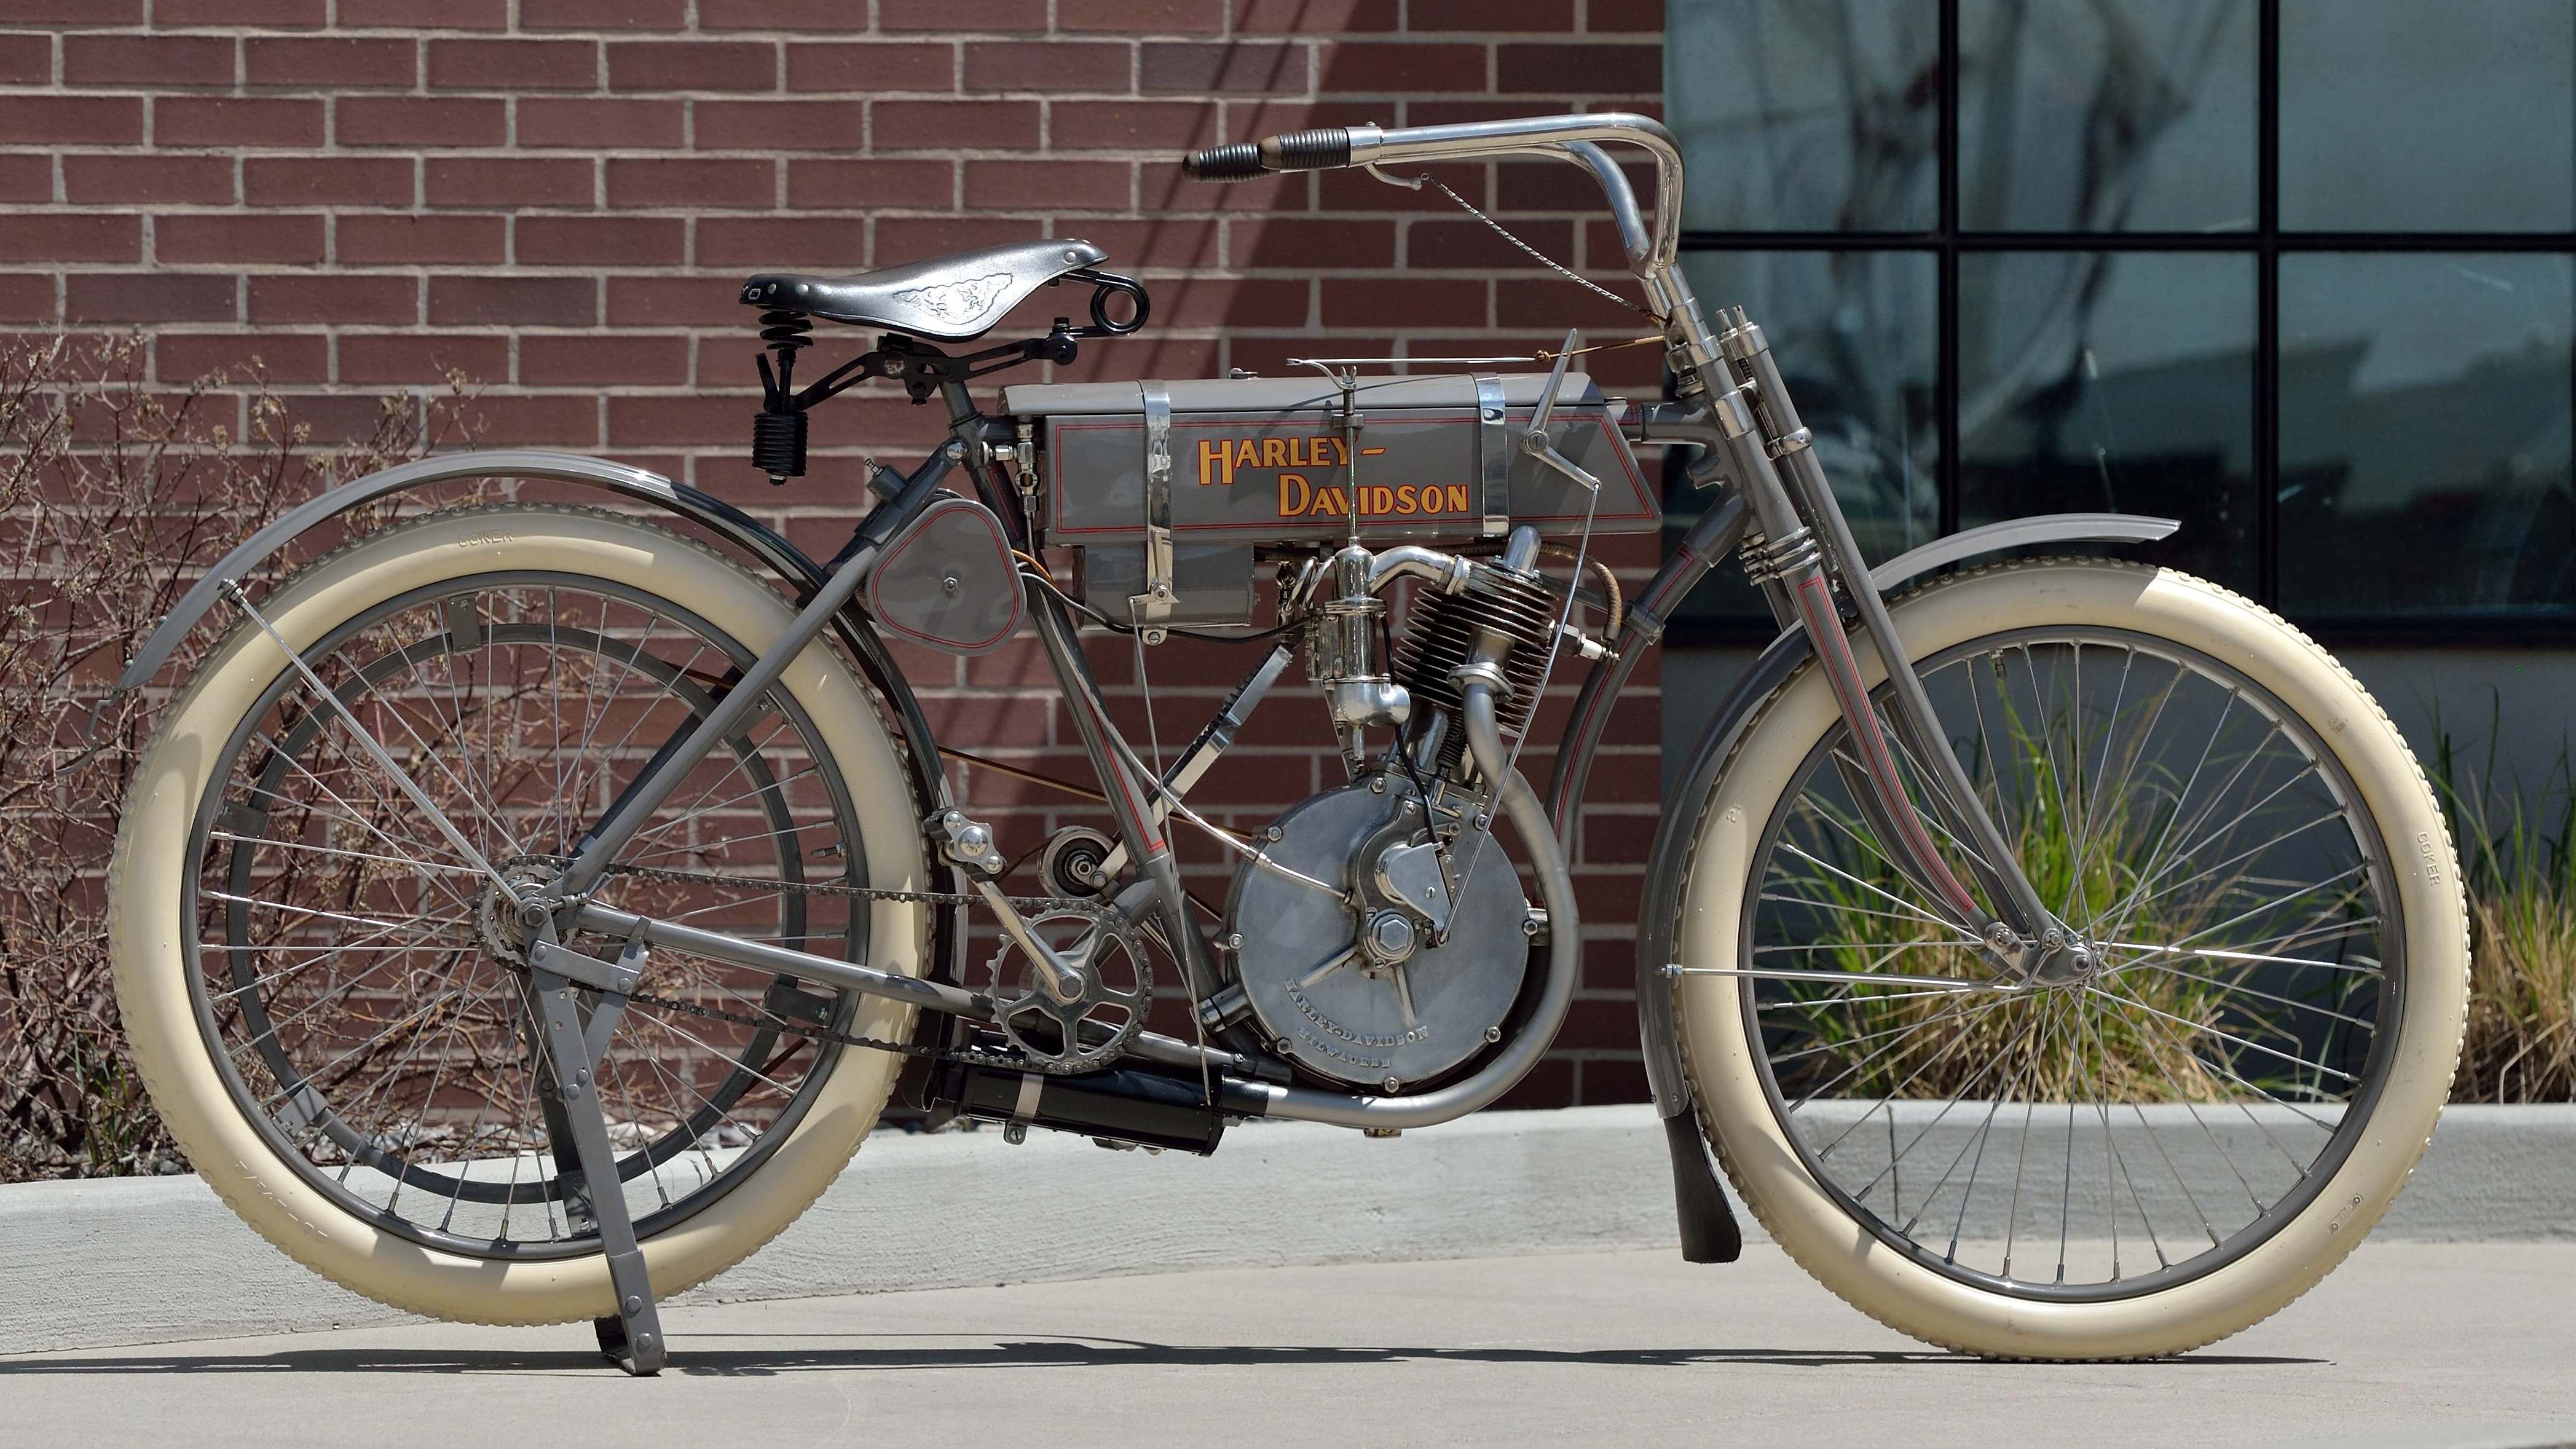 Million Dollar Harley: This Strap Tank Set a Record for Mecum